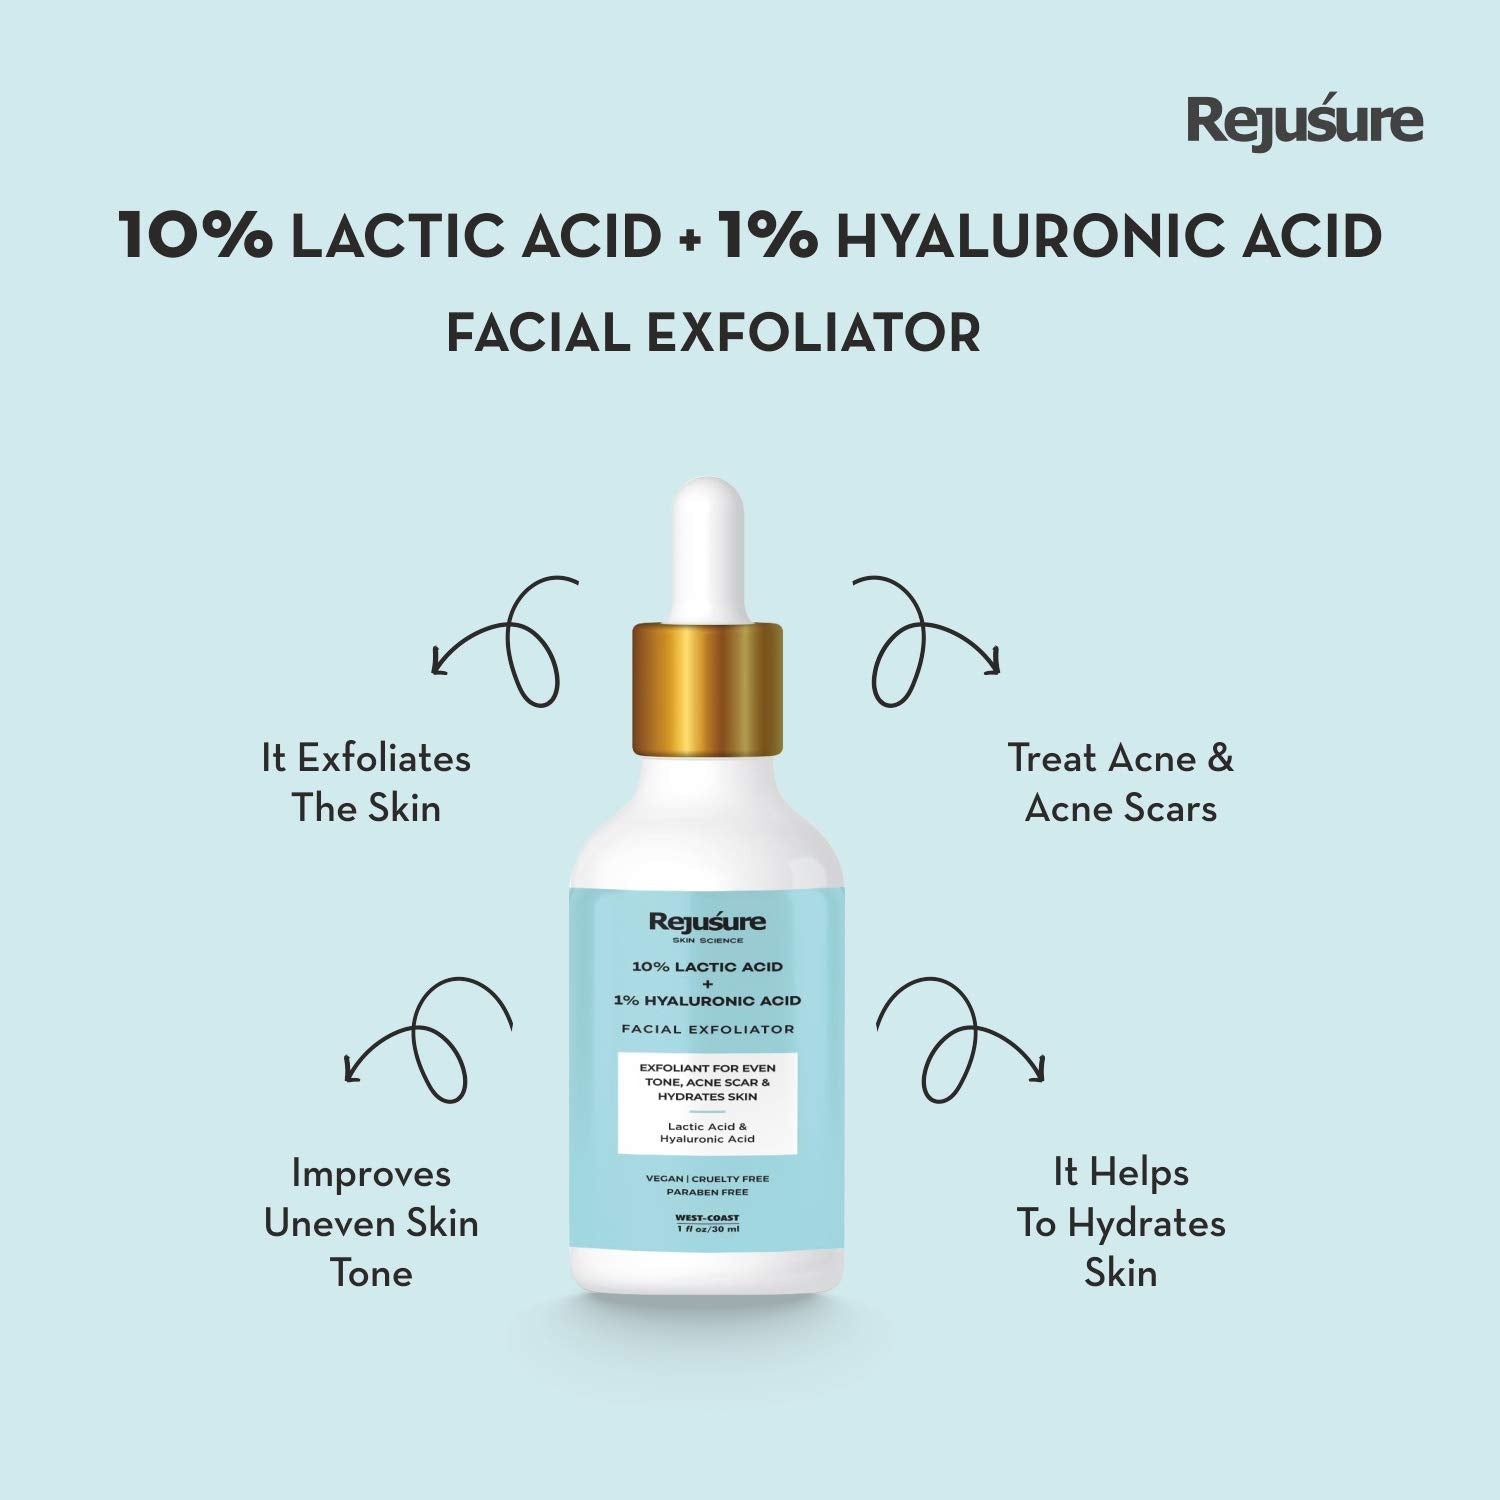 Rejusure Lactic Acid 10% + Hyaluronic Acid 1% Facial Exfoliator Exfoliant for Even Tone, Acne Scar & Hydrates Skin Best for Sensitive, Dry & Oily skin – 30ml (Pack of 3)